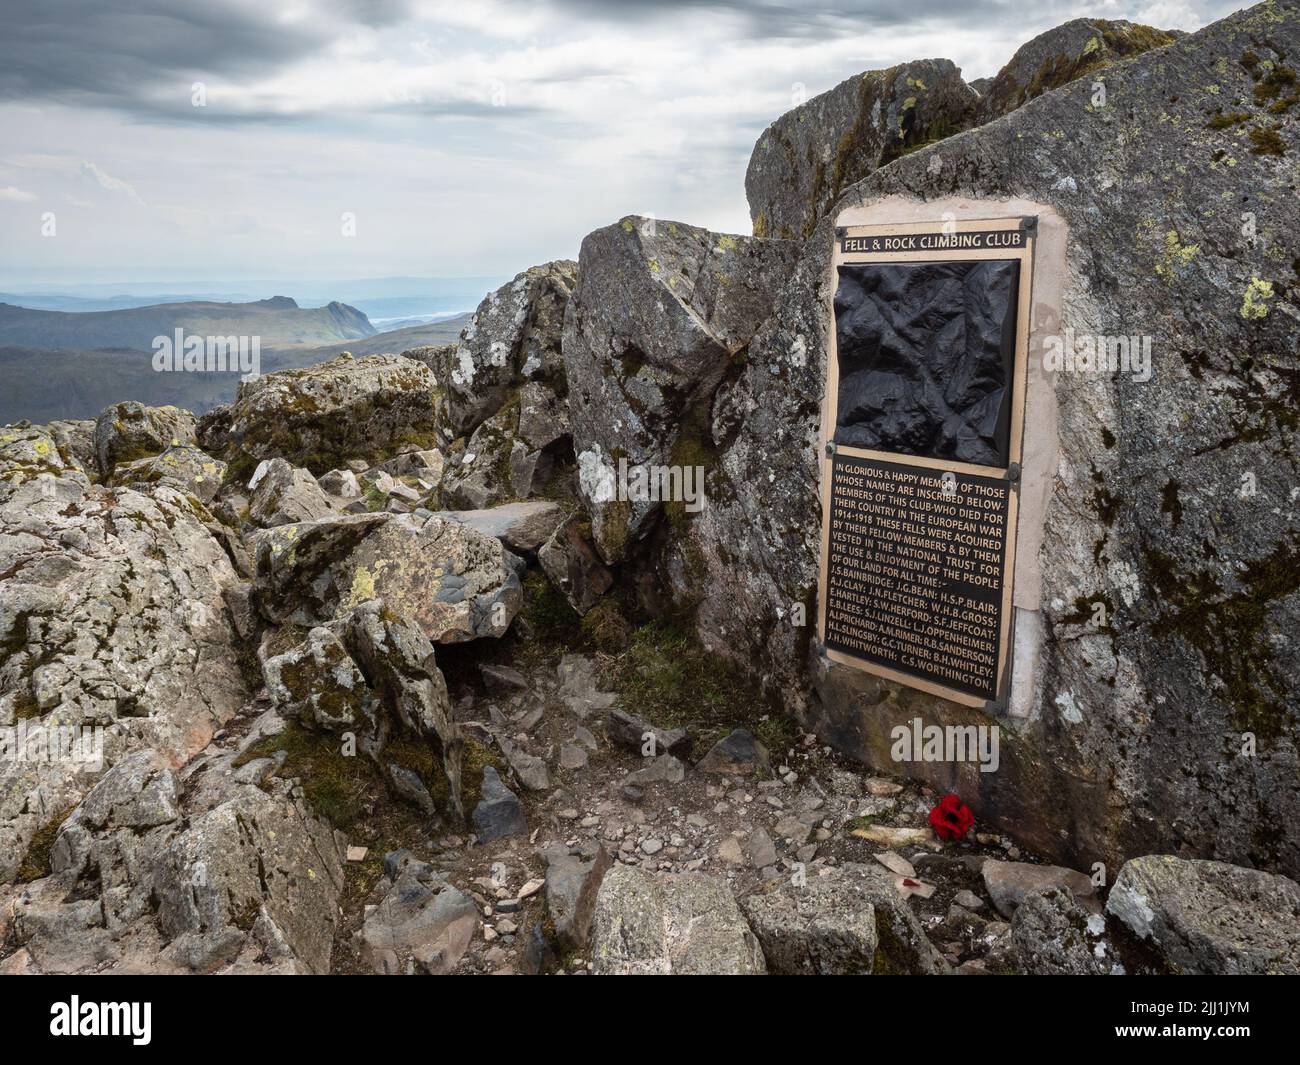 At the summit of Great Gable - a mountain in the Lake District, Cumbria, England - sits a memorial to members of the Fell and Rock Climbing Club who f Stock Photo